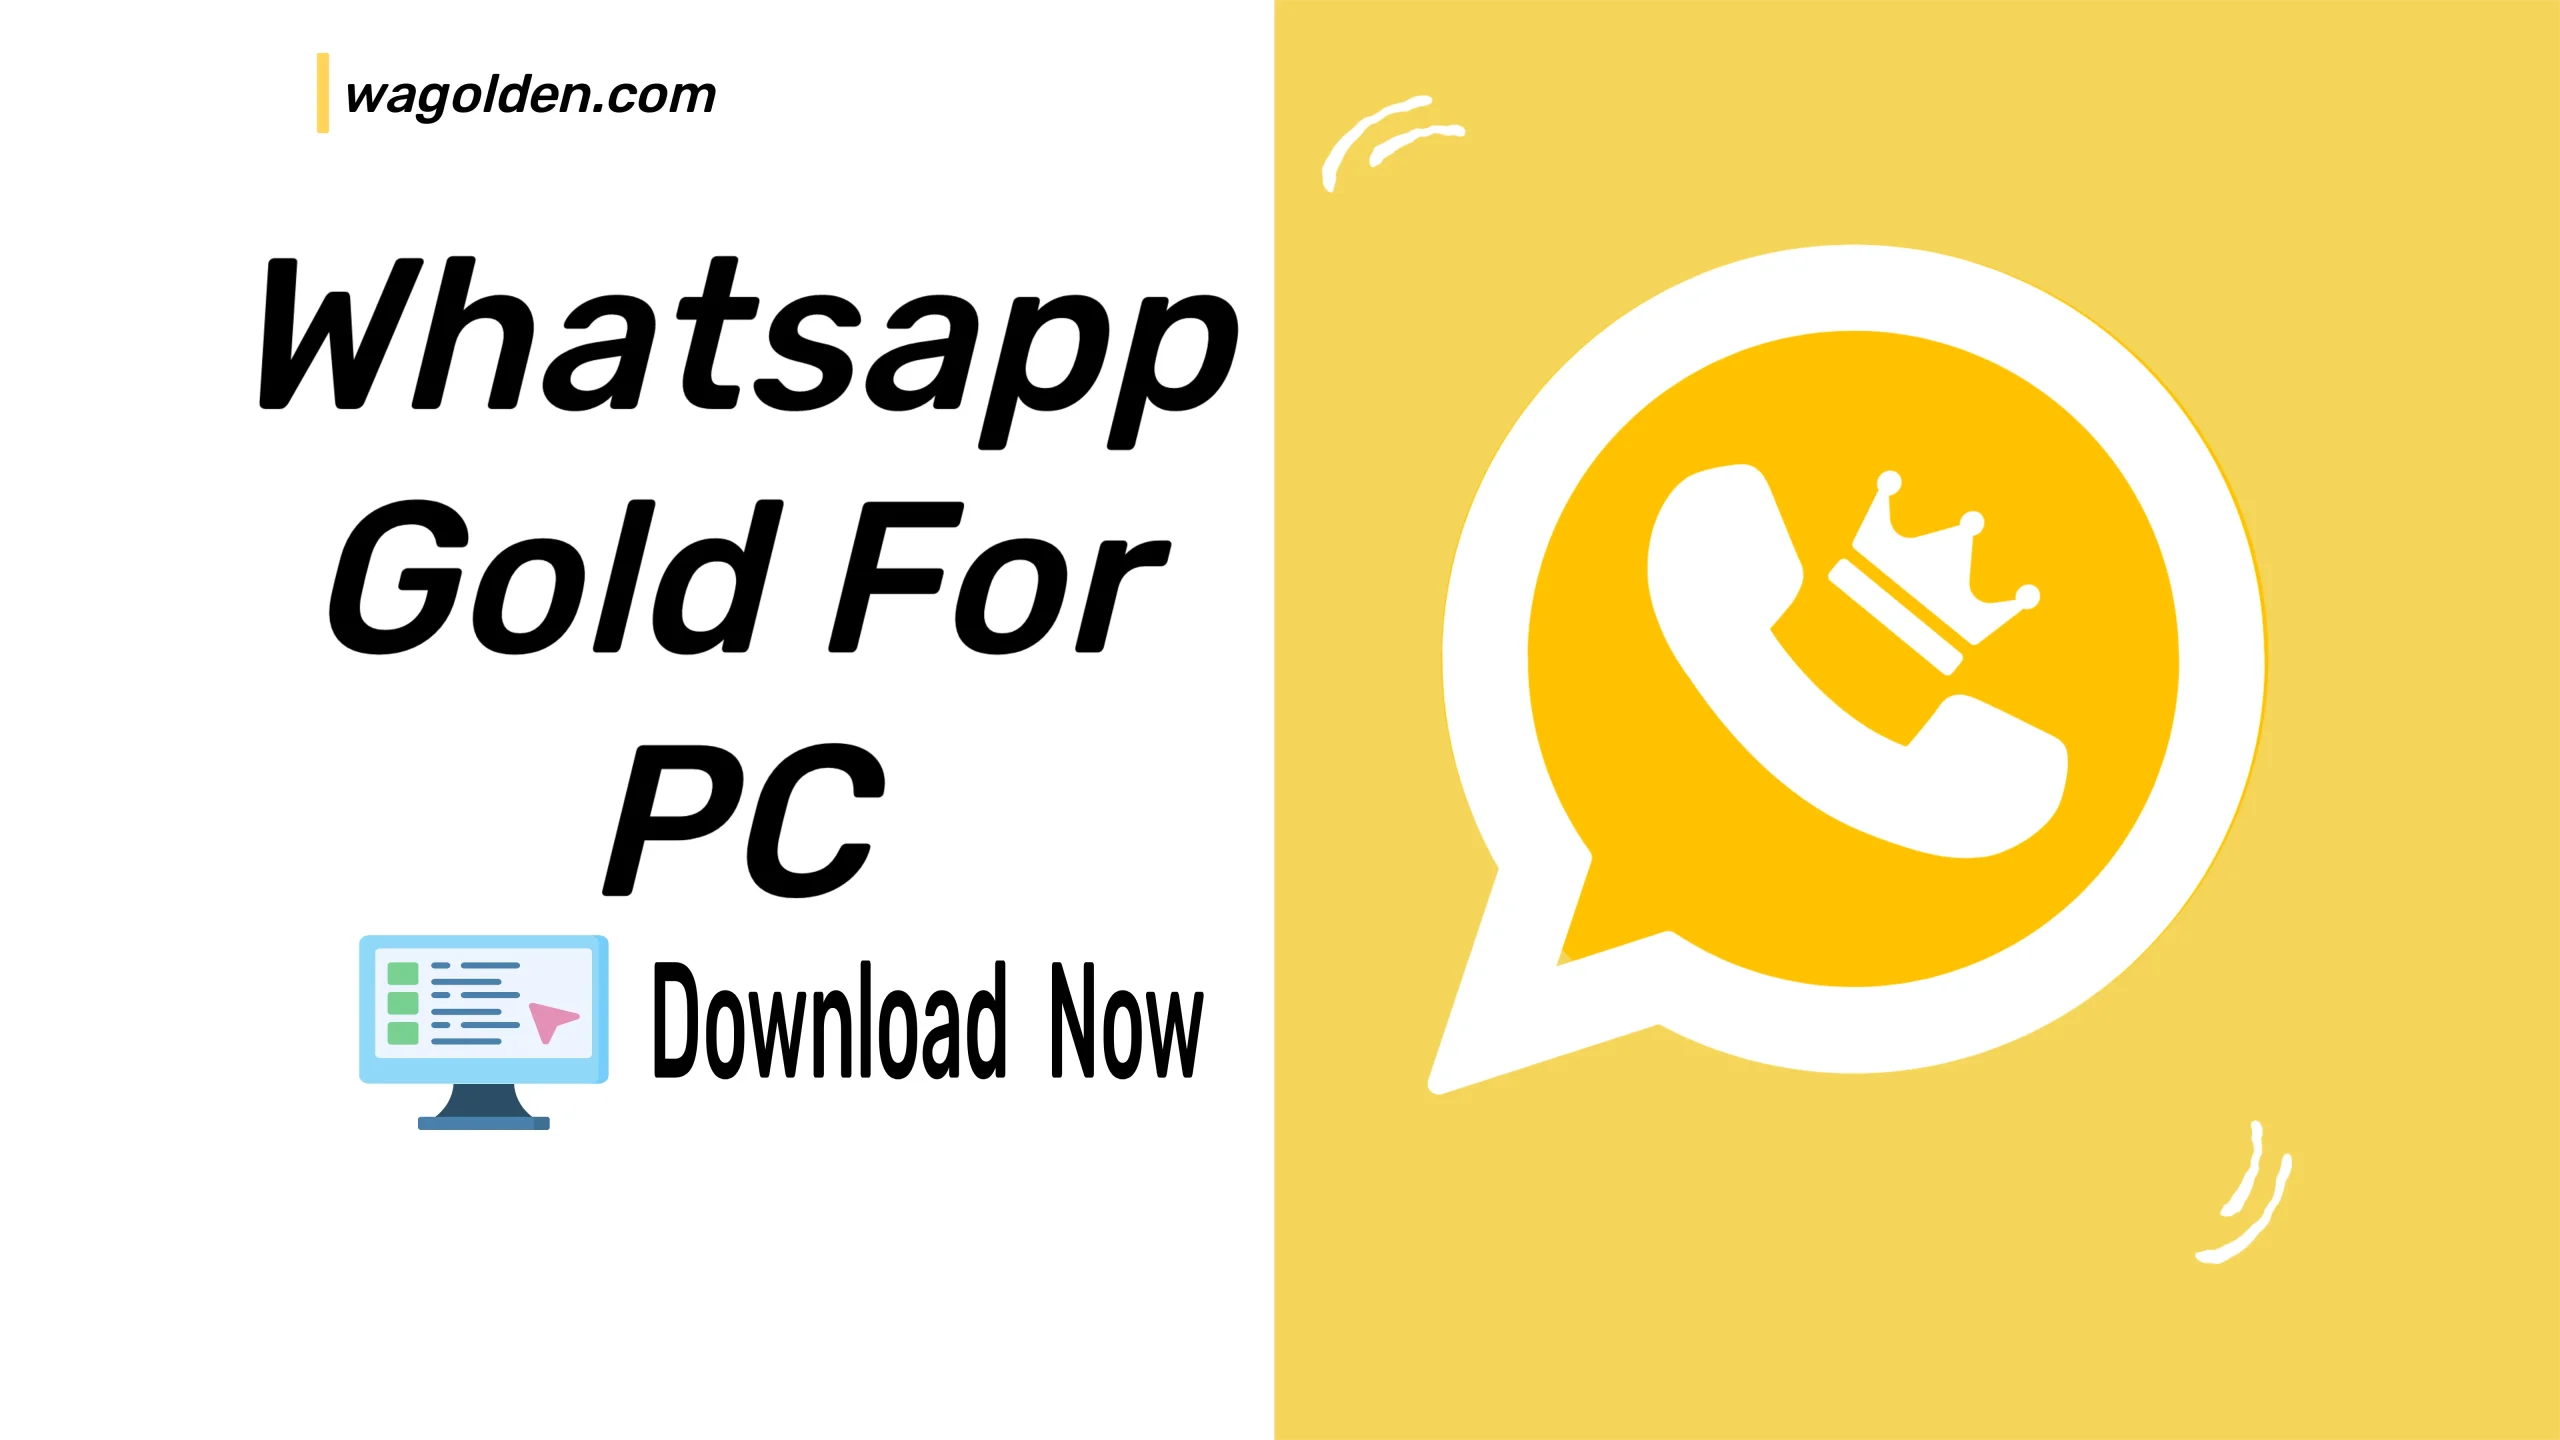 Whatsapp gold for pc